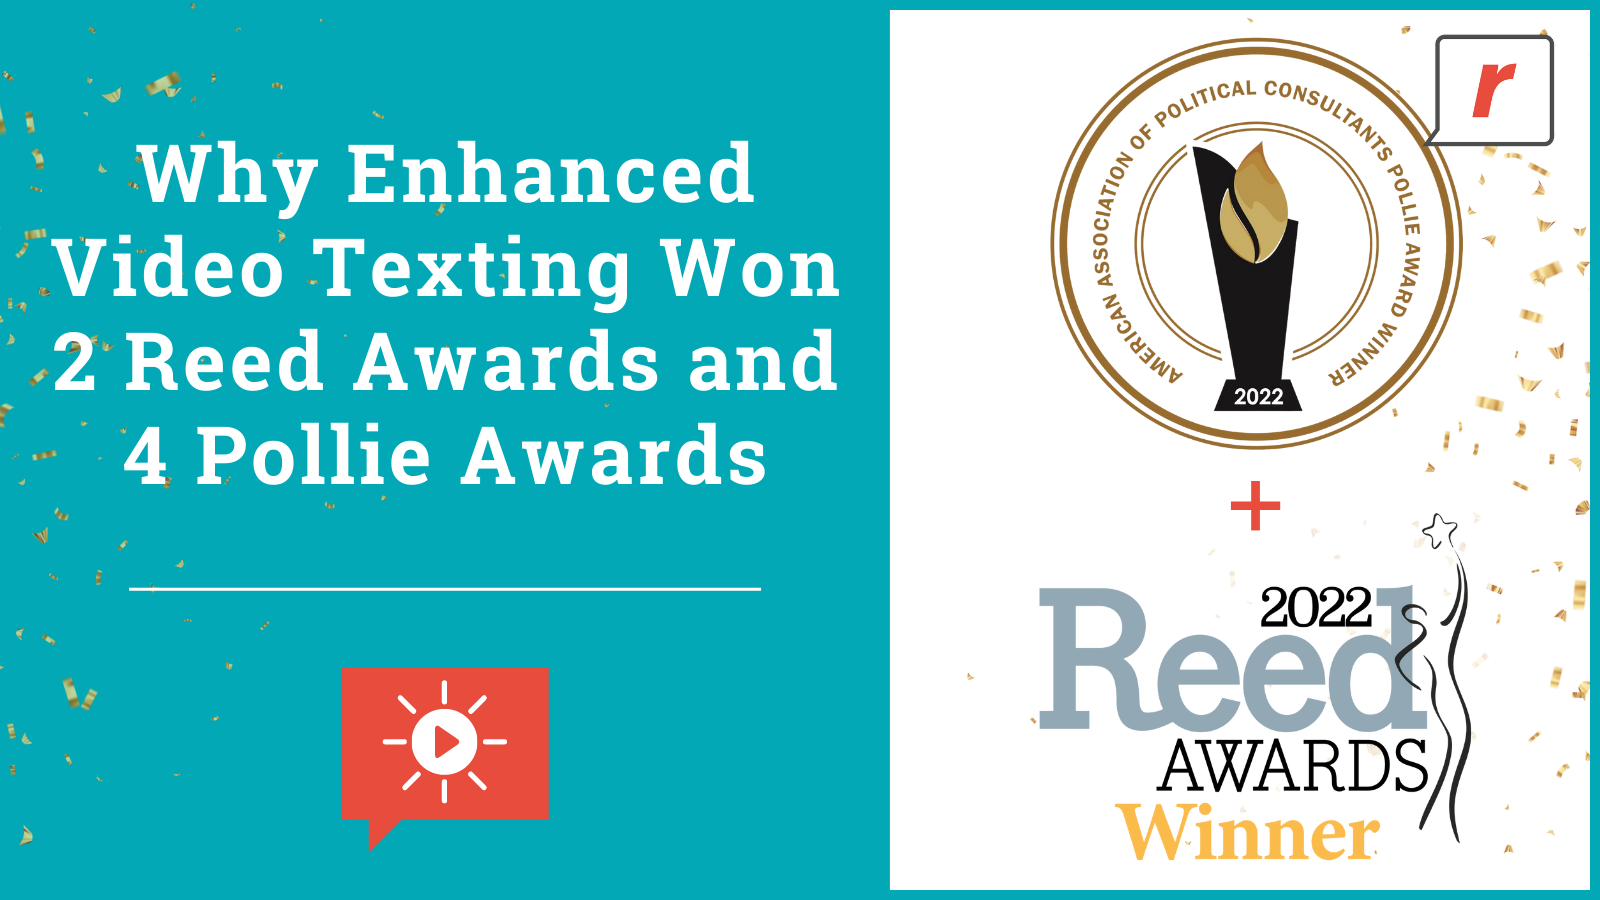 Why Our Industry-Leading Enhanced Video Texting Won 2 Reed Awards and 4 Pollie Awards